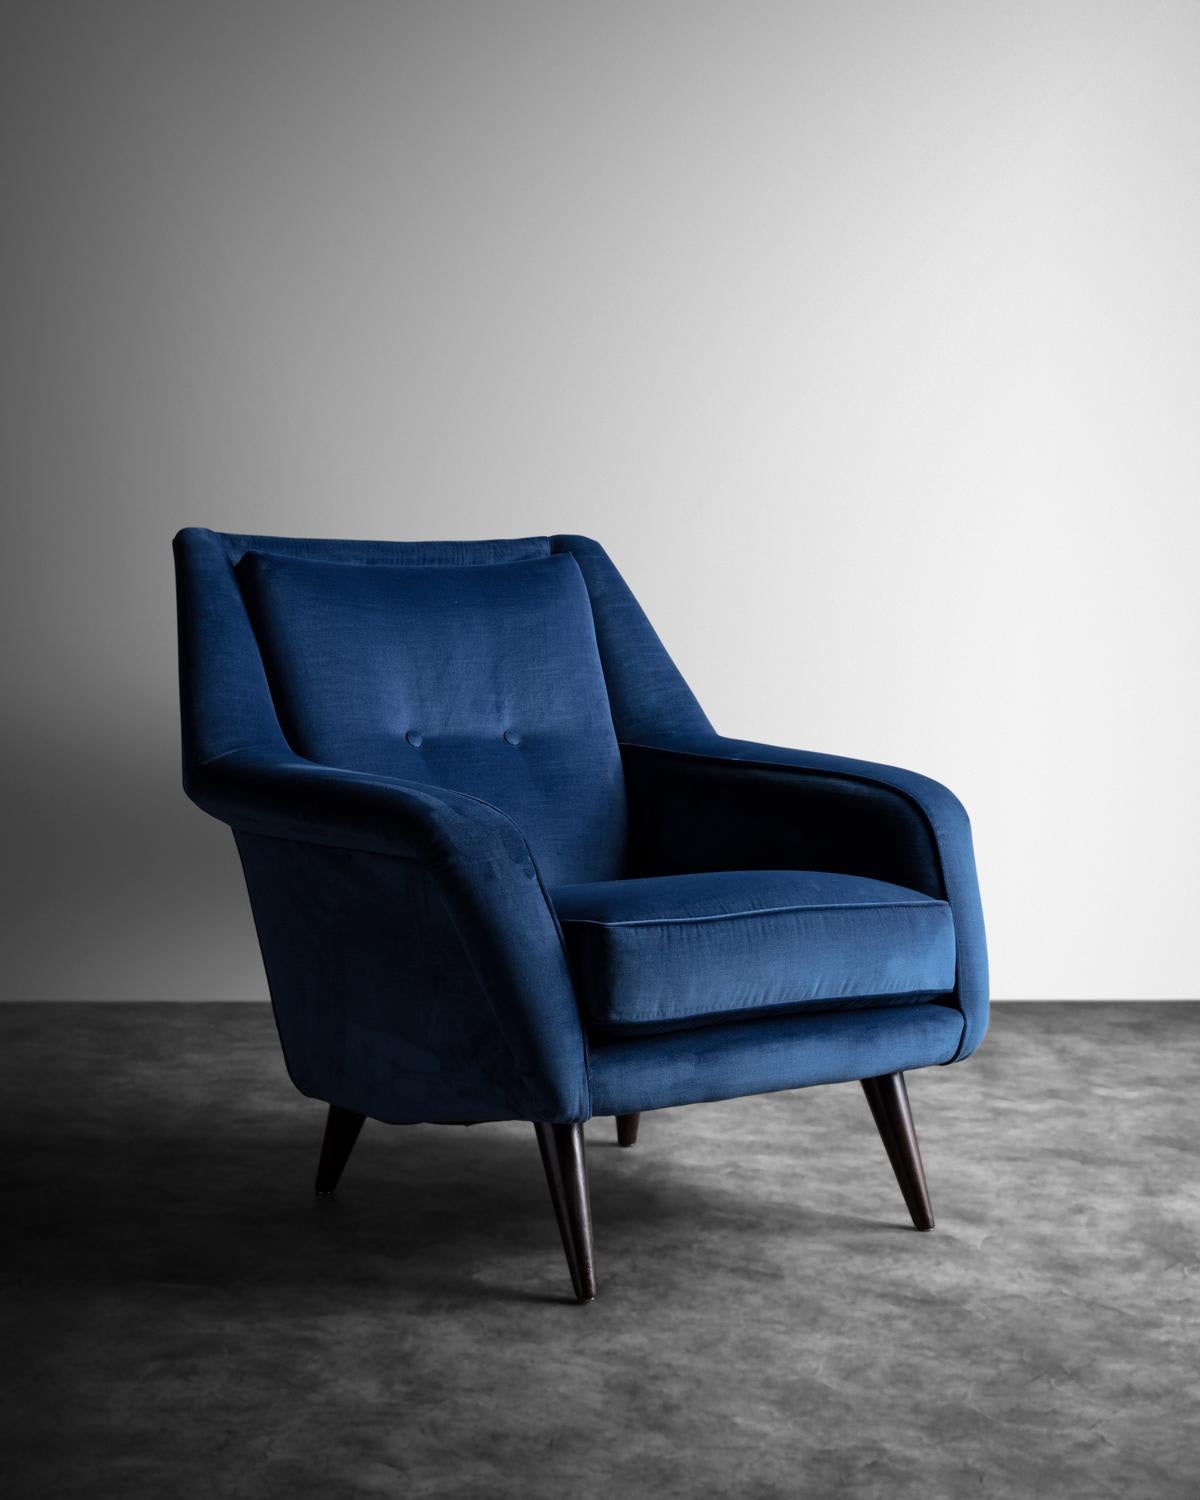 Over-upholstered chair with a steeply reclined back, down curved arms and four tapered tinted wooden legs.
       